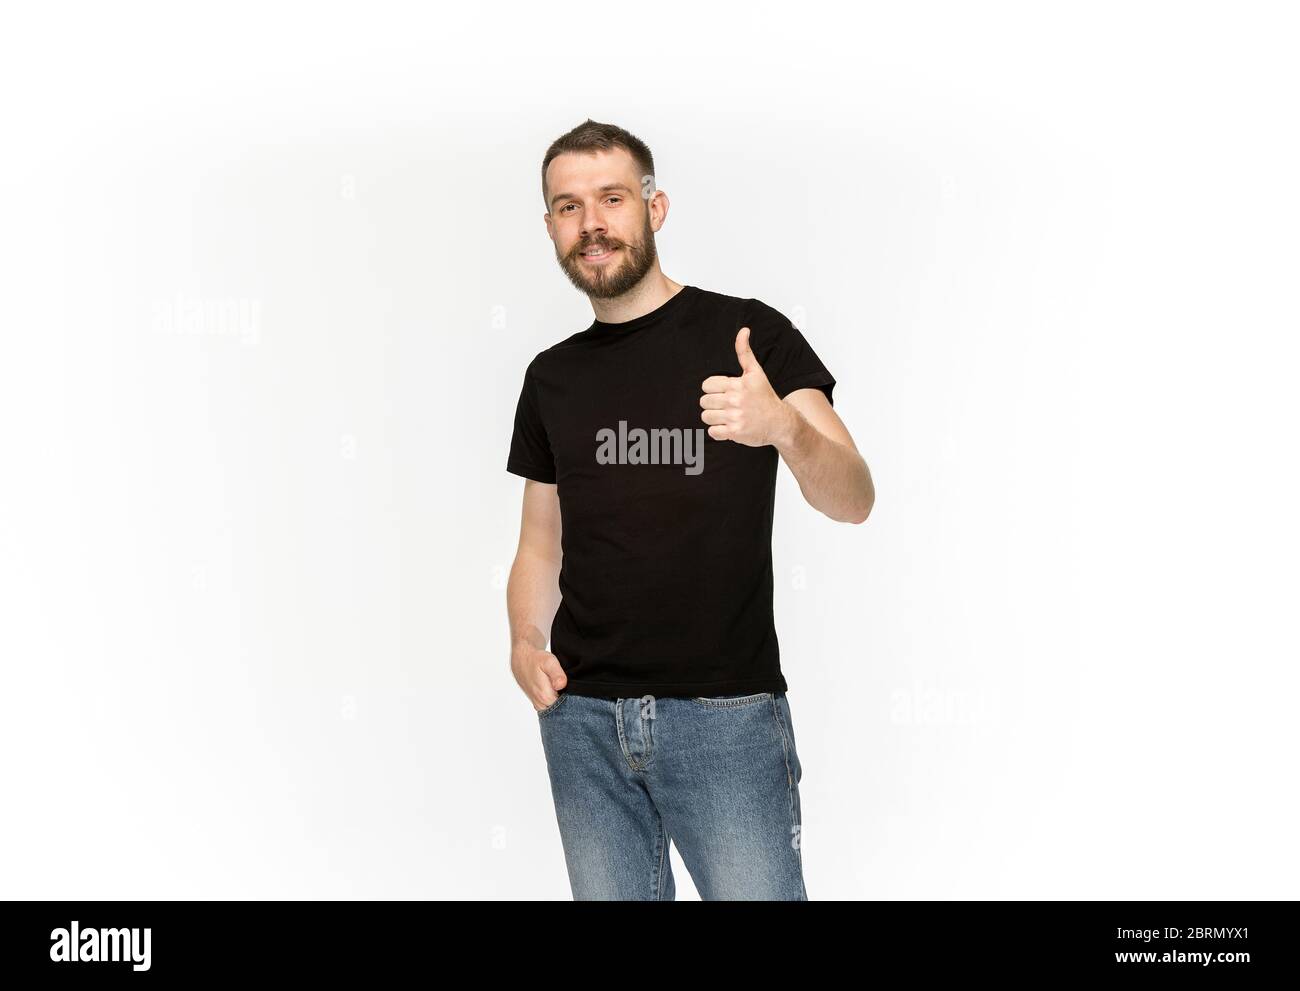 Closeup of young man's body in empty black t-shirt isolated on white background. Clothing, mock up for disign concept with copy space. Advertising con Stock Photo